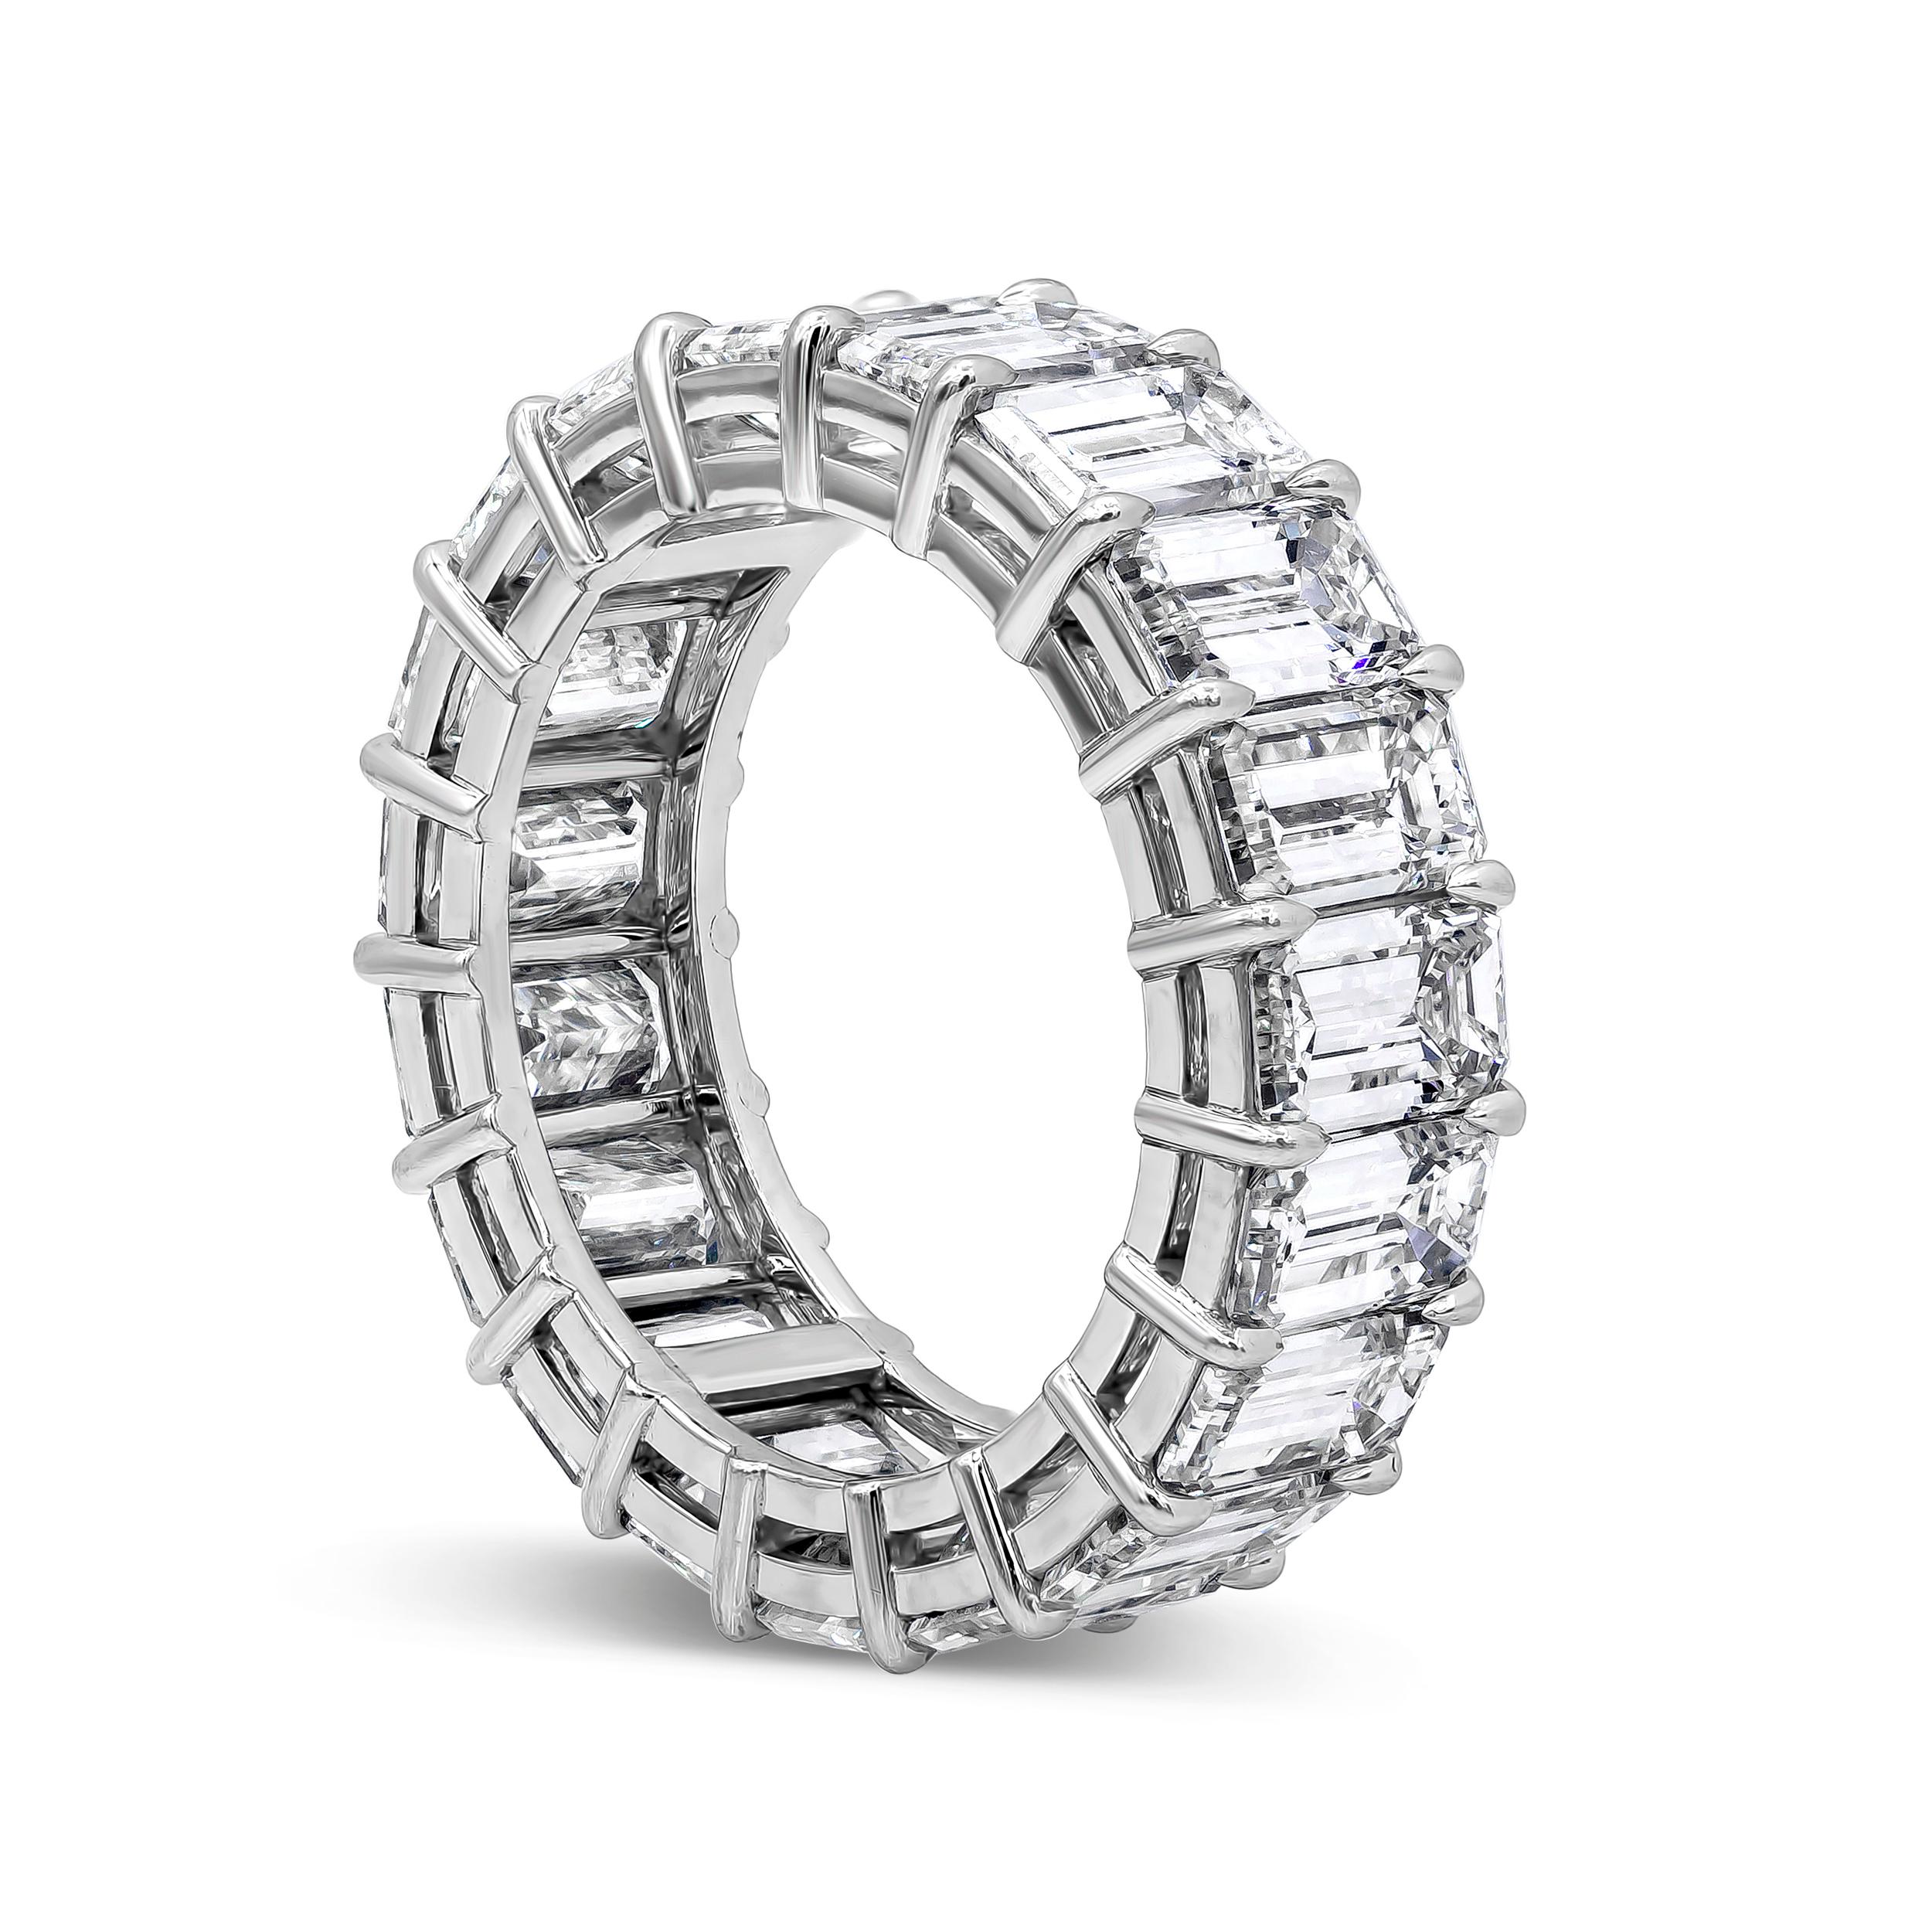 A simple and brilliant eternity wedding band showcasing a row of emerald cut diamonds weighing 9.52 carats total, set in a timeless shared prong setting and polished platinum mounting. Size 6.25 US resizable upon request and 0.25 inches in